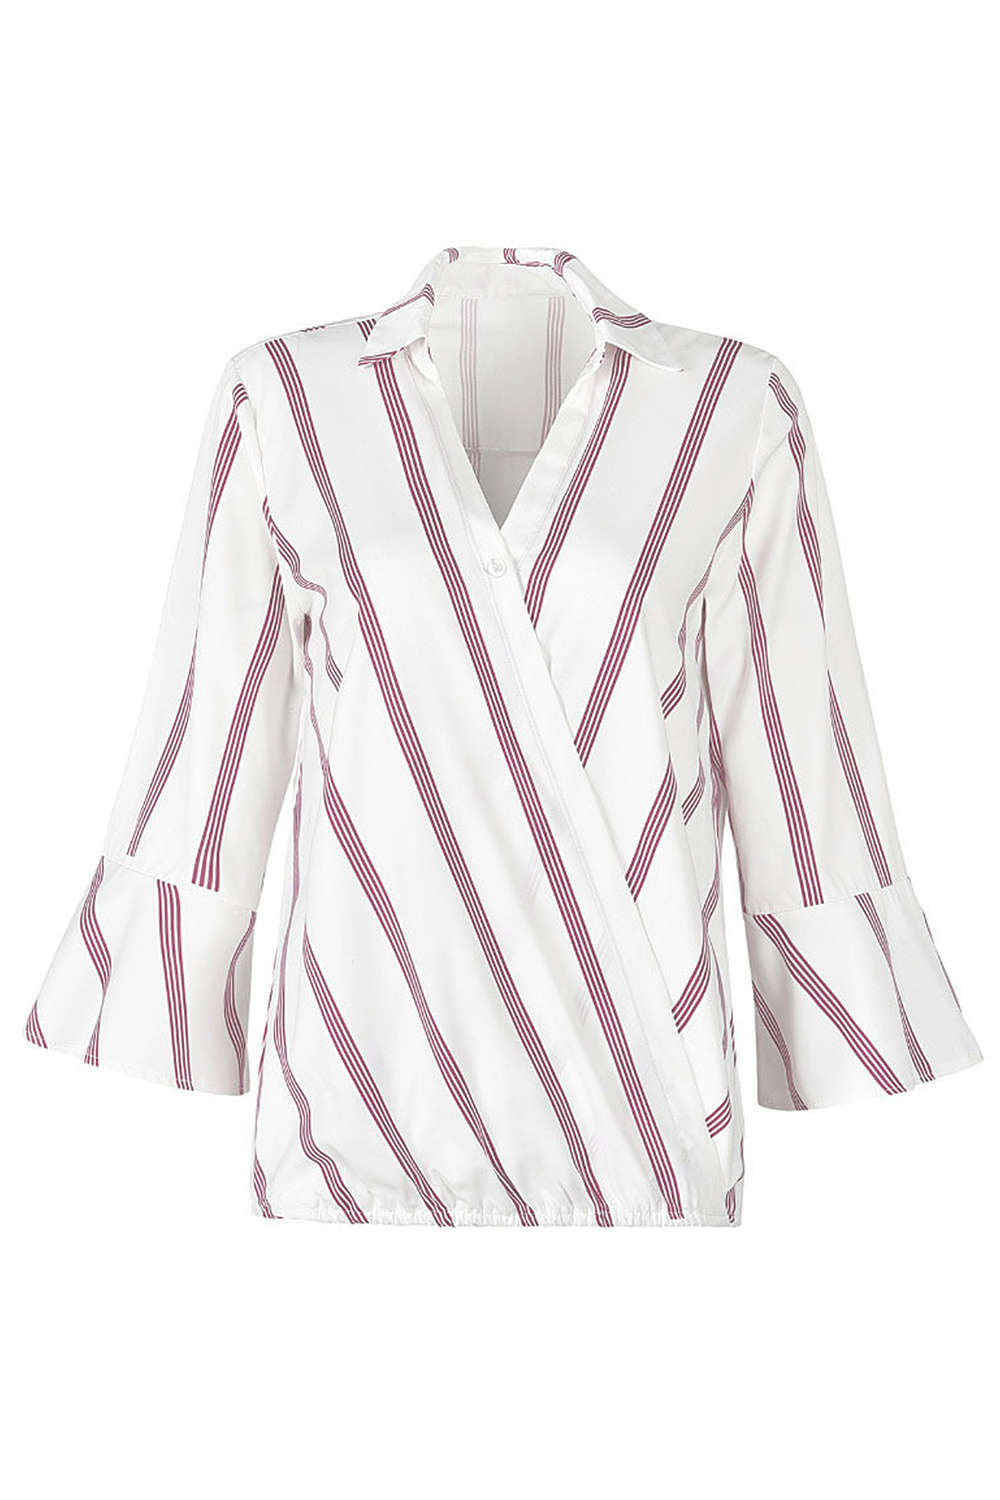 Iyasson V neck Long Sleeve Striped Casual Blouse